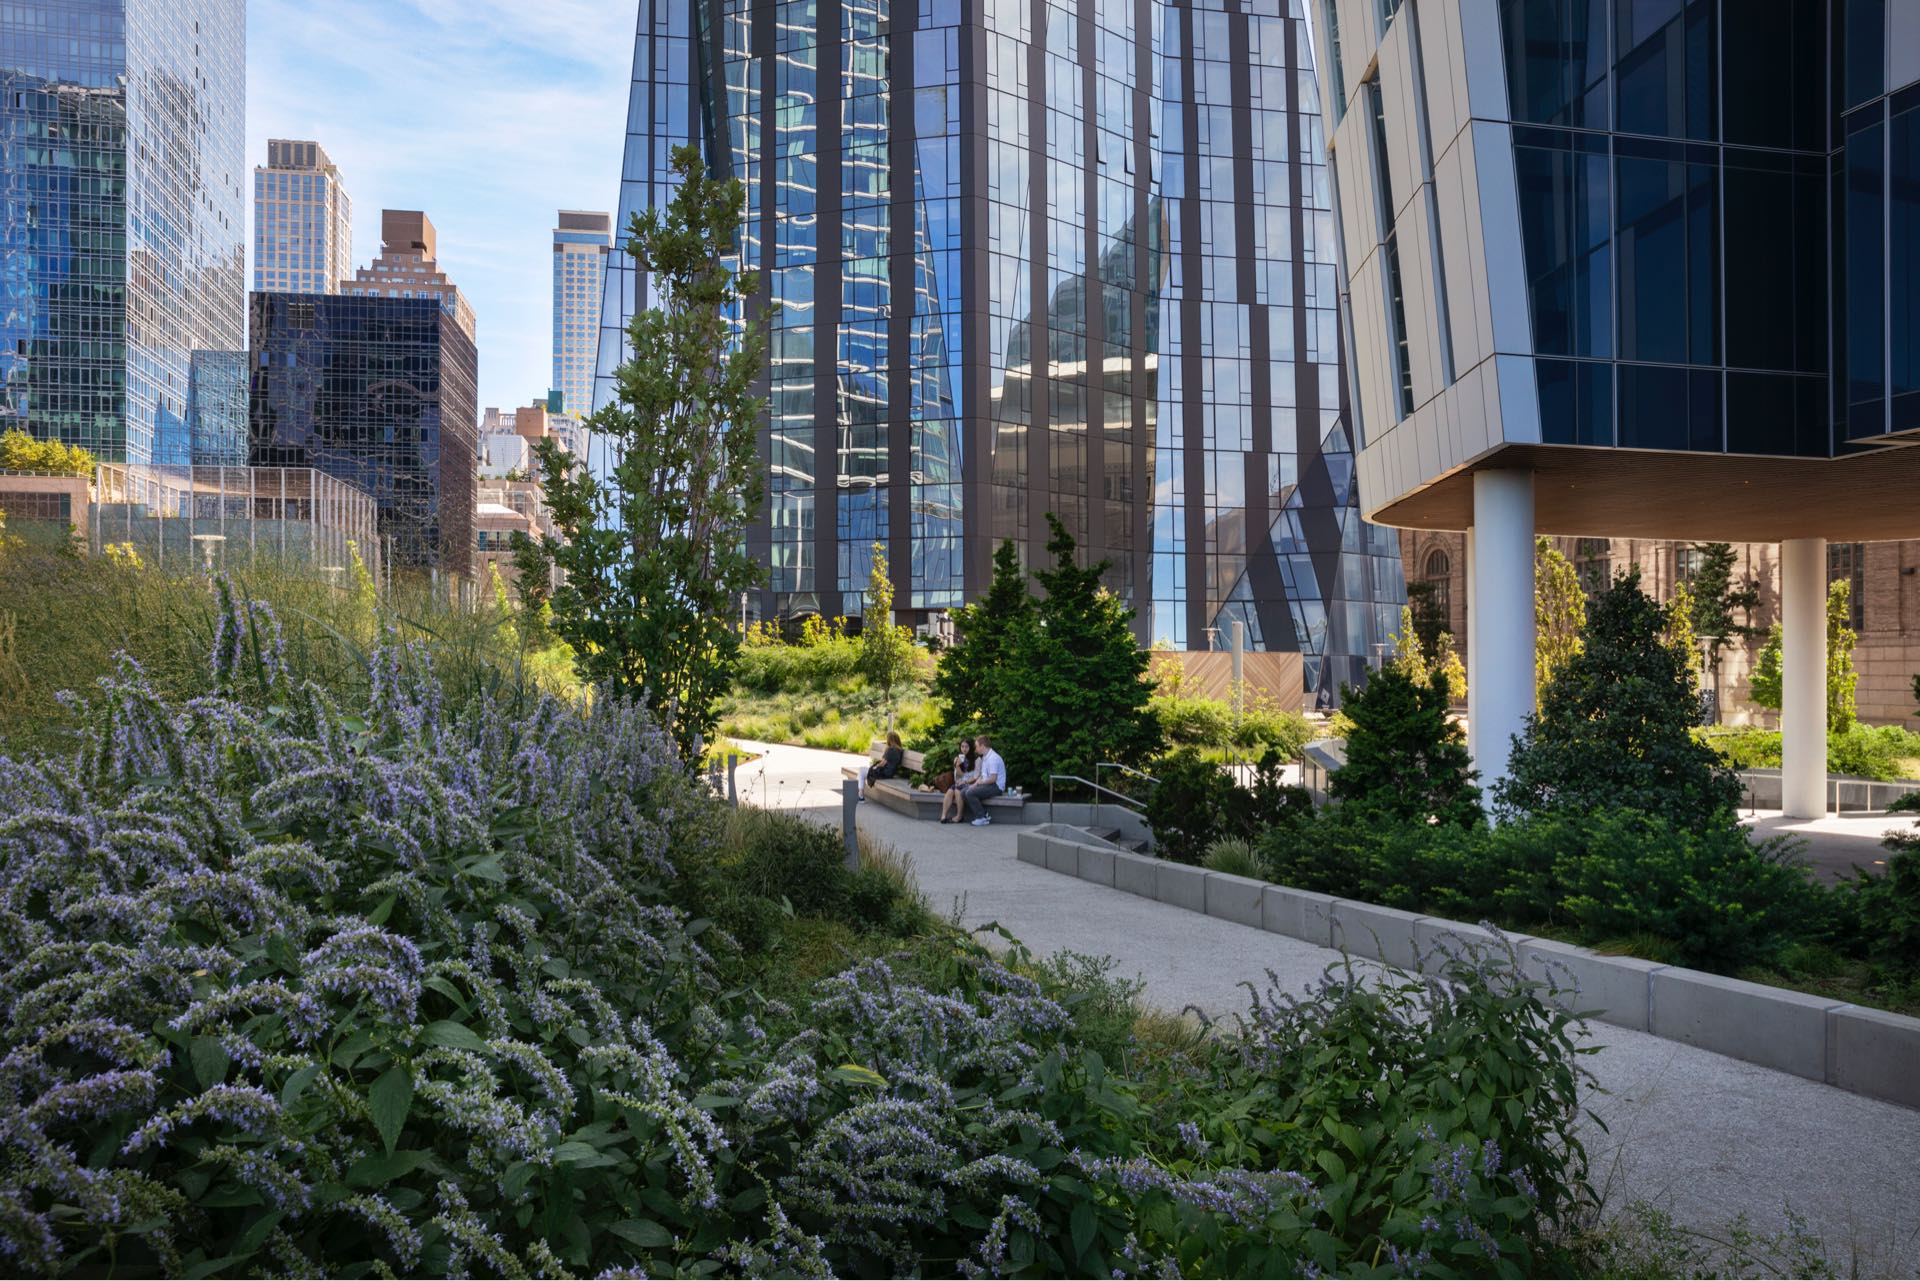 A tranquil urban garden nestled among modern high-rise buildings, with people enjoying a sunny day amidst lush greenery and blooming purple flowers.